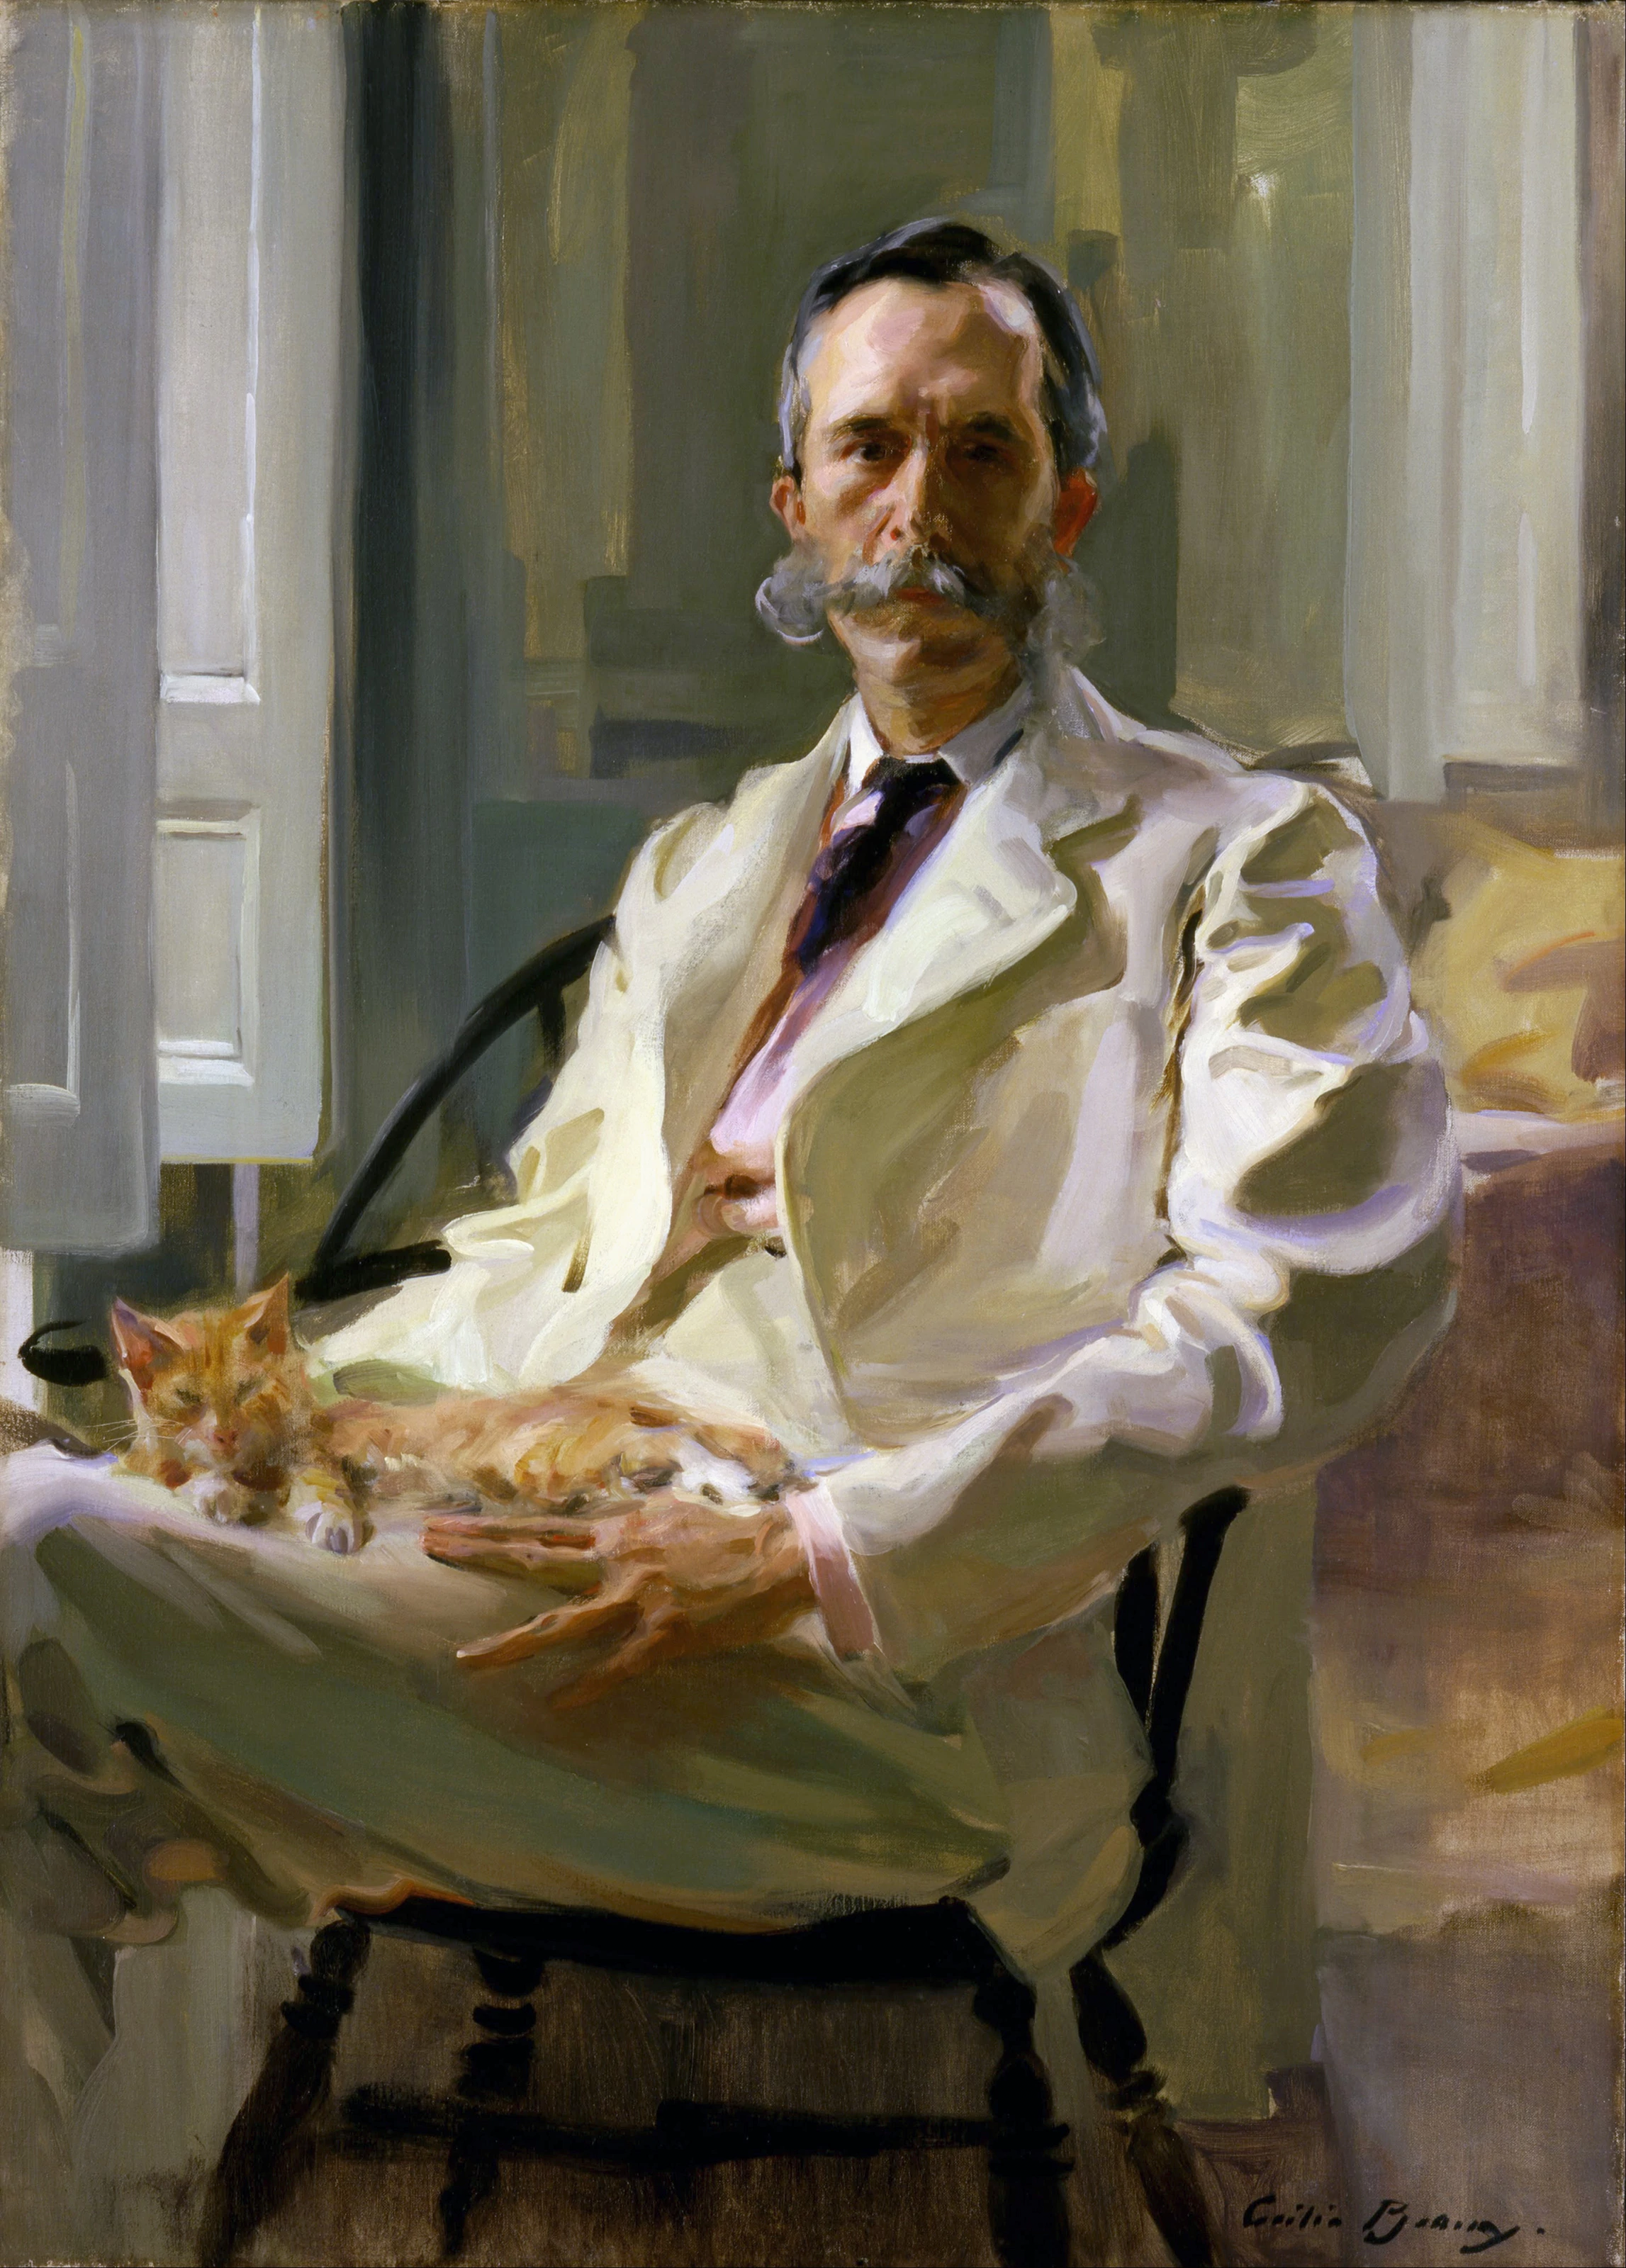 Man with the Cat — Portrait of Henry Sturgis Drinker, Cecilia Beaux